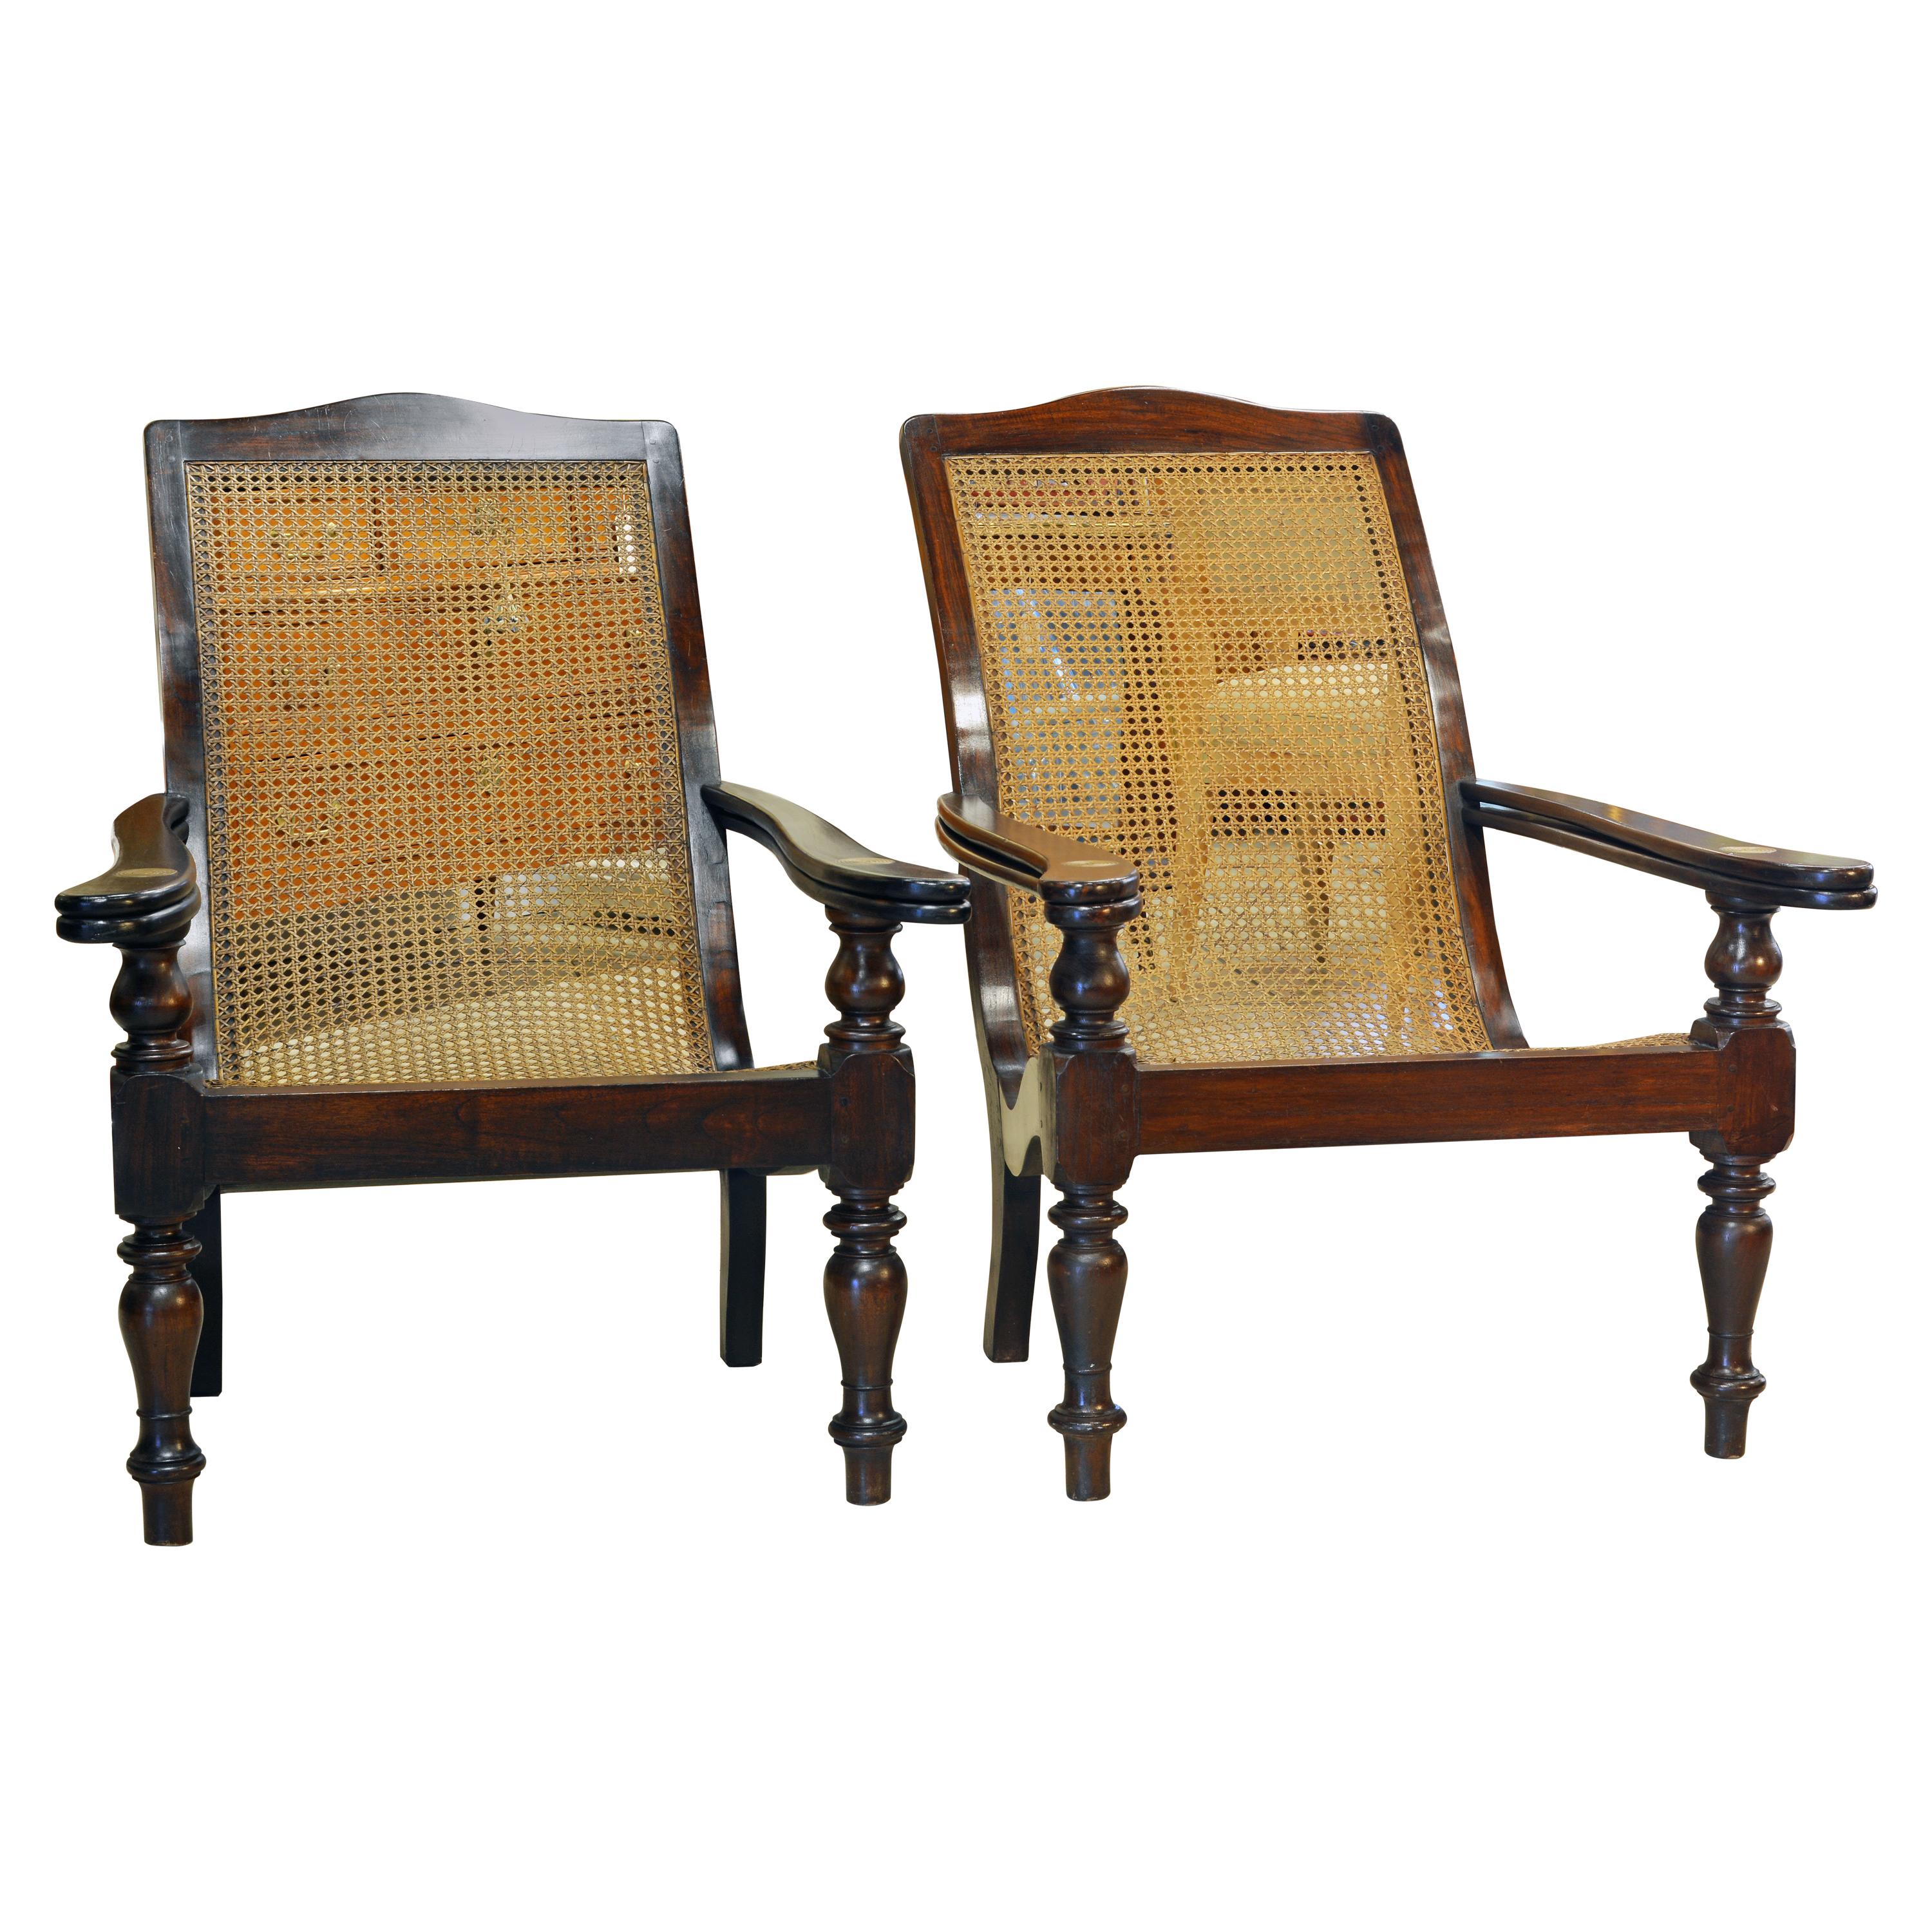 Pair of Anglo Indian Style 20th Century Mahogany and Cane Seat Plantation Chairs